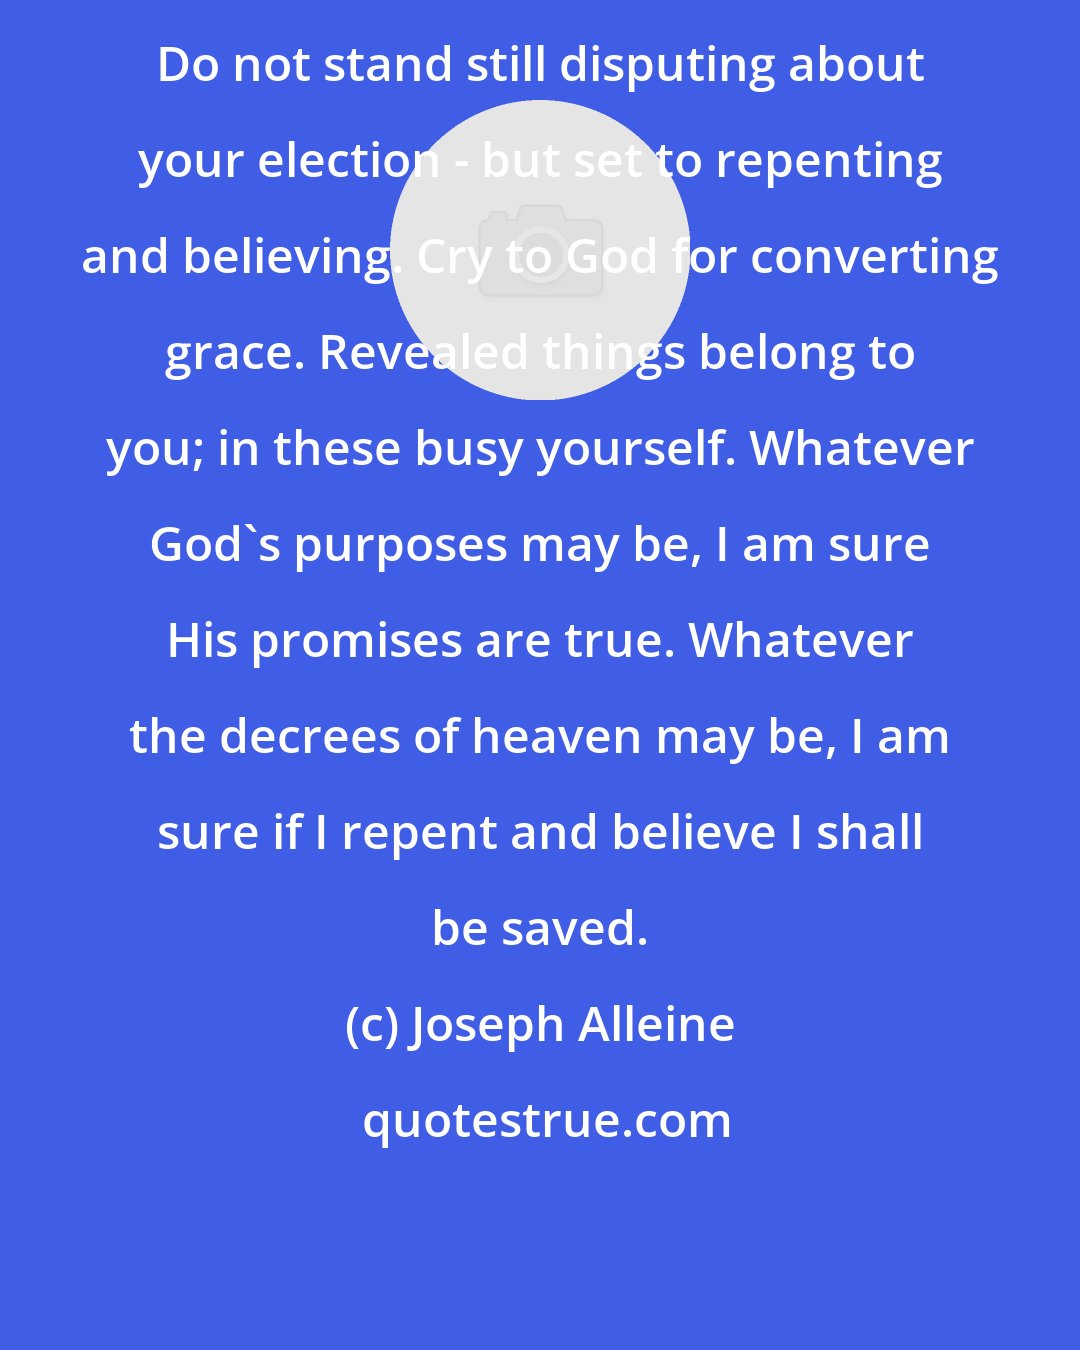 Joseph Alleine: Do not stand still disputing about your election - but set to repenting and believing. Cry to God for converting grace. Revealed things belong to you; in these busy yourself. Whatever God's purposes may be, I am sure His promises are true. Whatever the decrees of heaven may be, I am sure if I repent and believe I shall be saved.